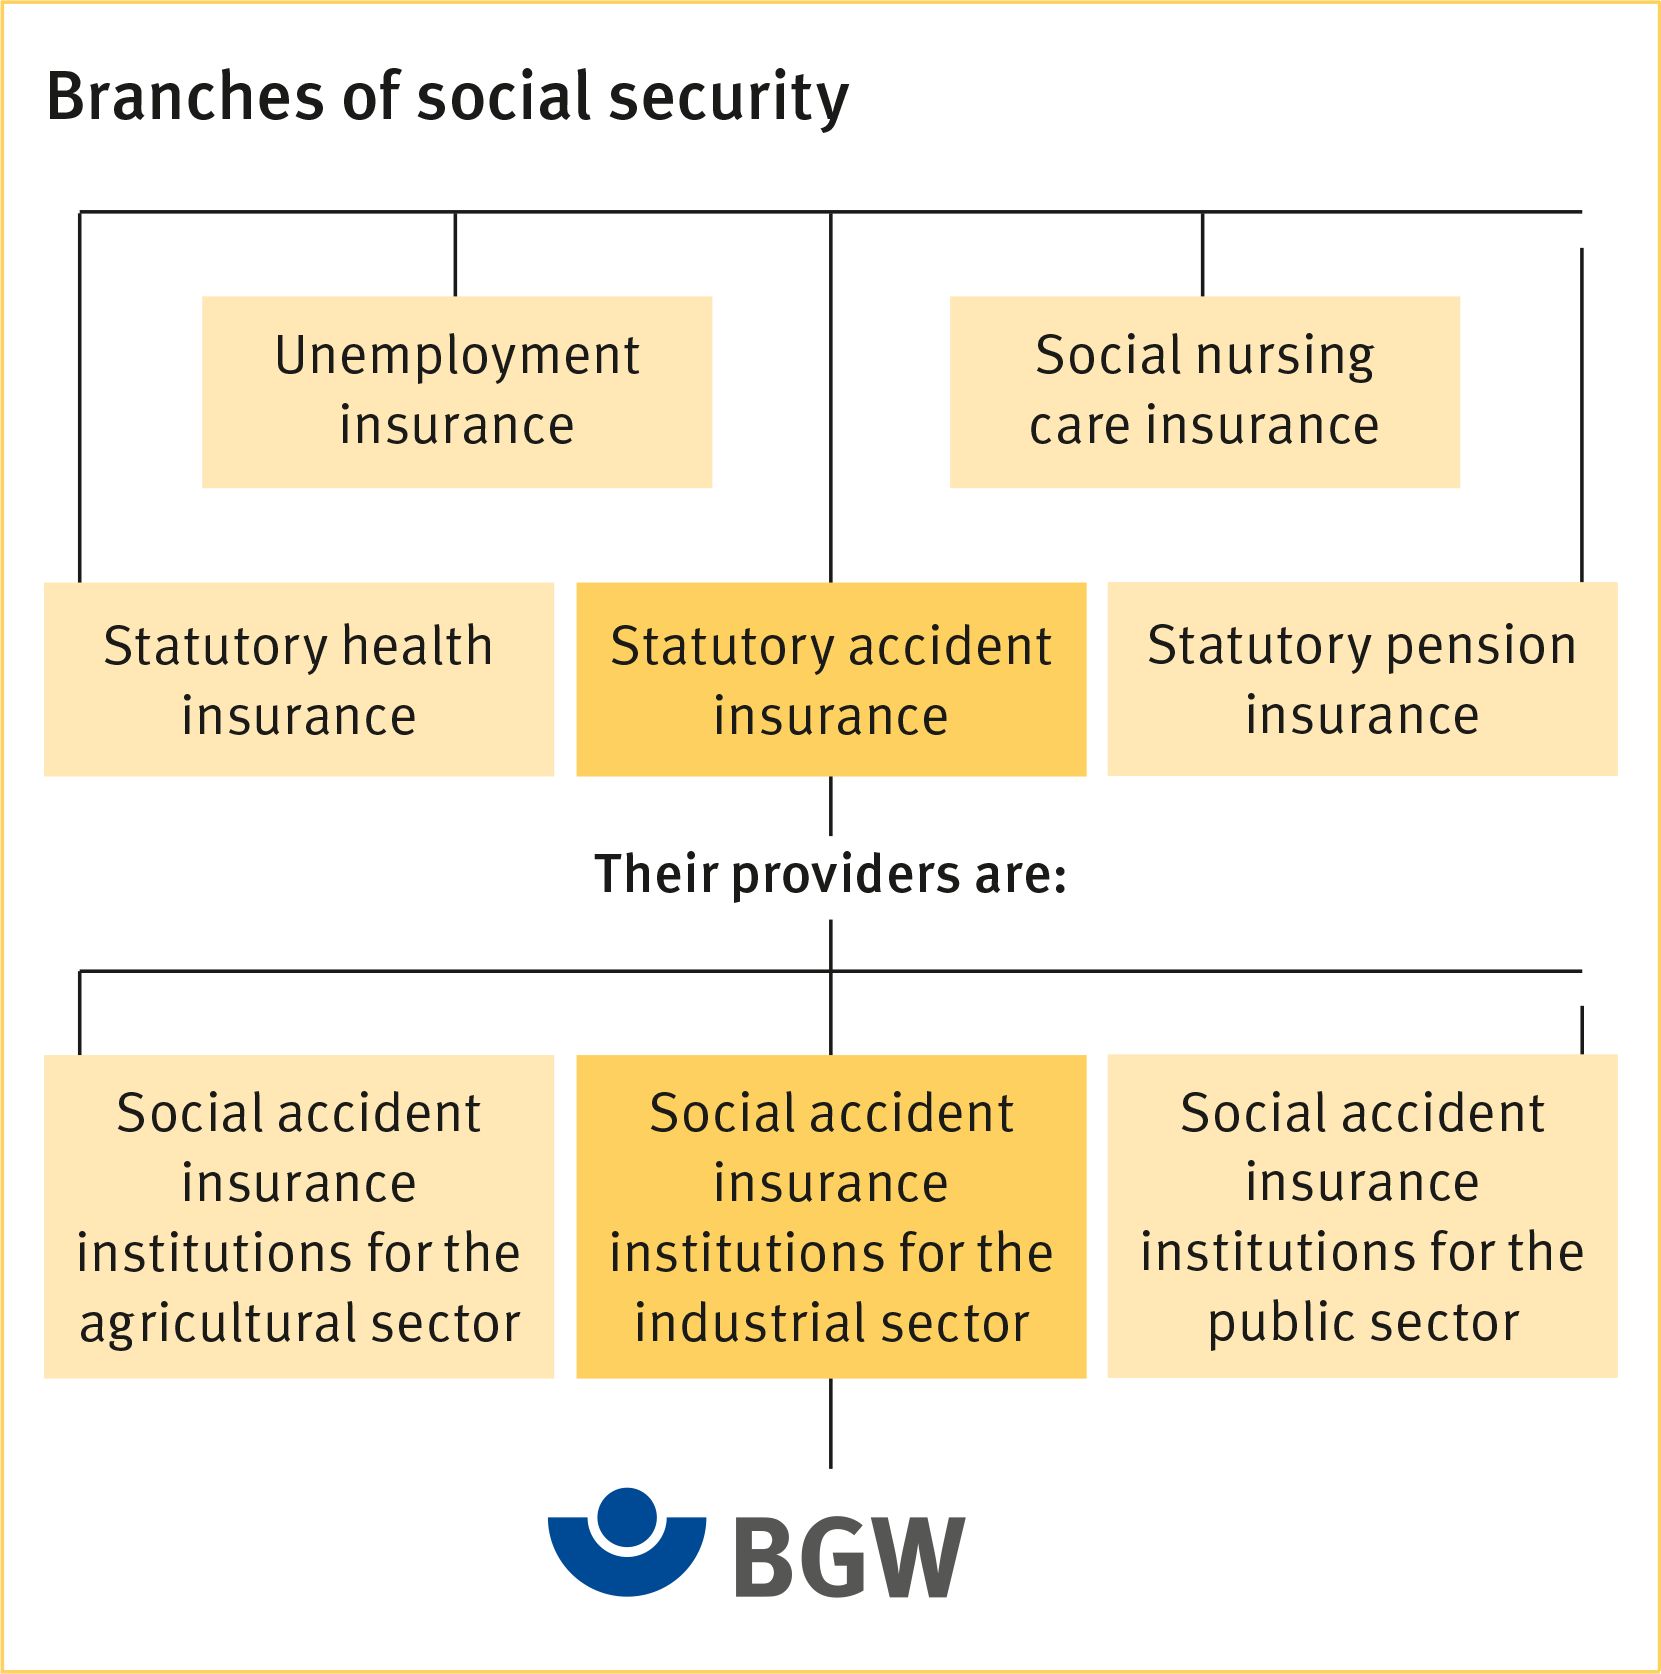 Branches of social security in Germany an their providers presented in an information grahic.